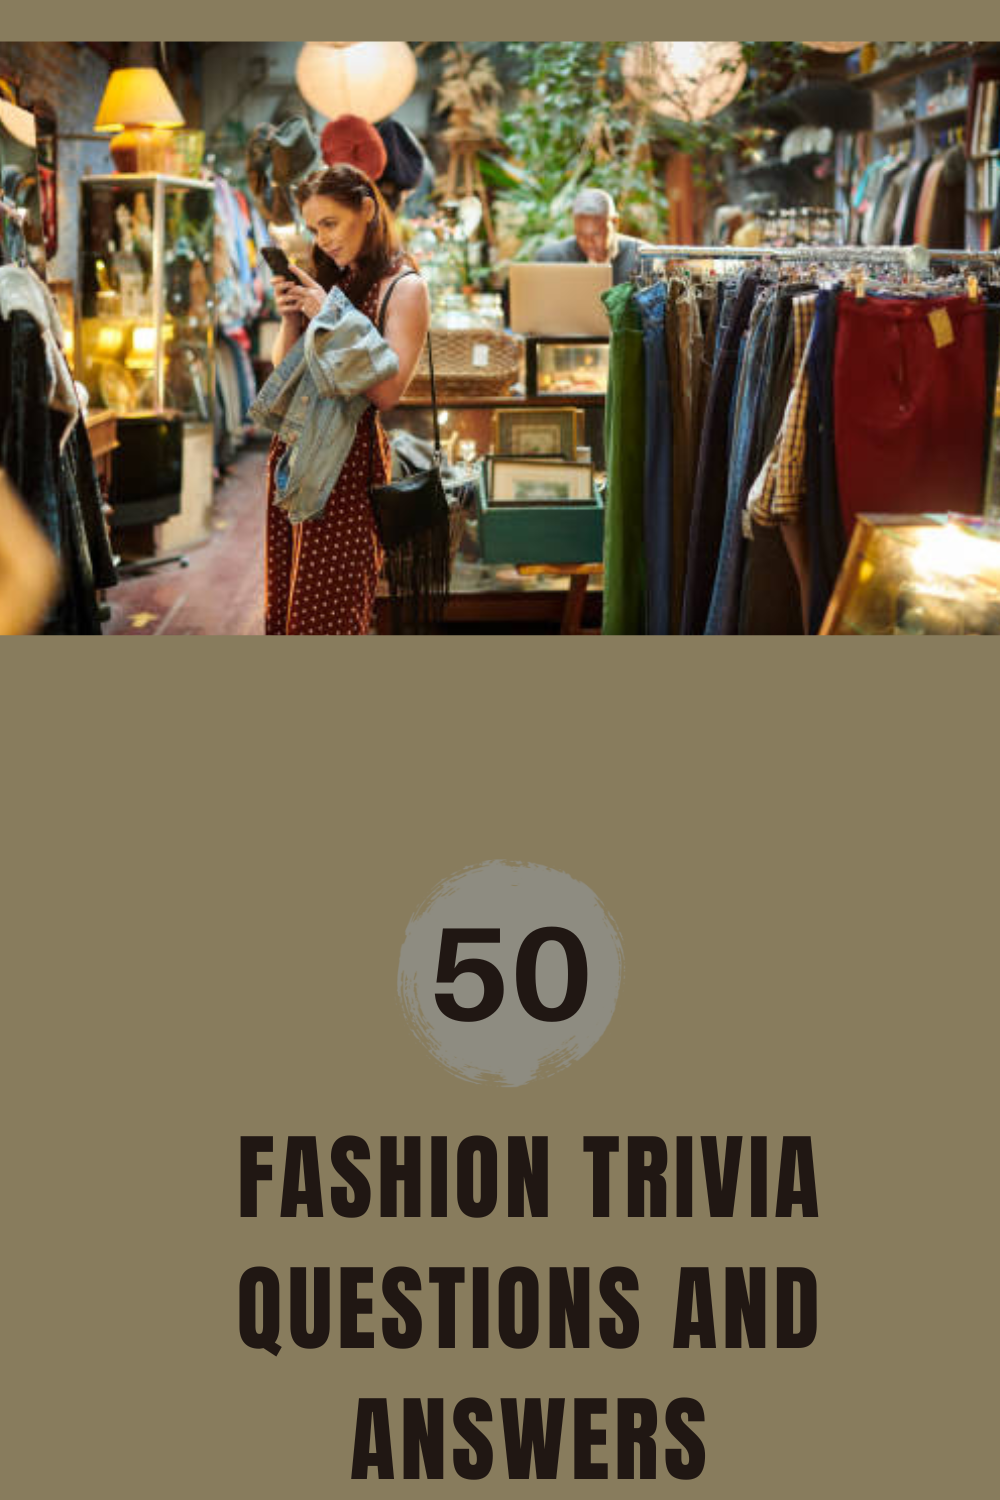 Fashion Trivia Questions and Answers